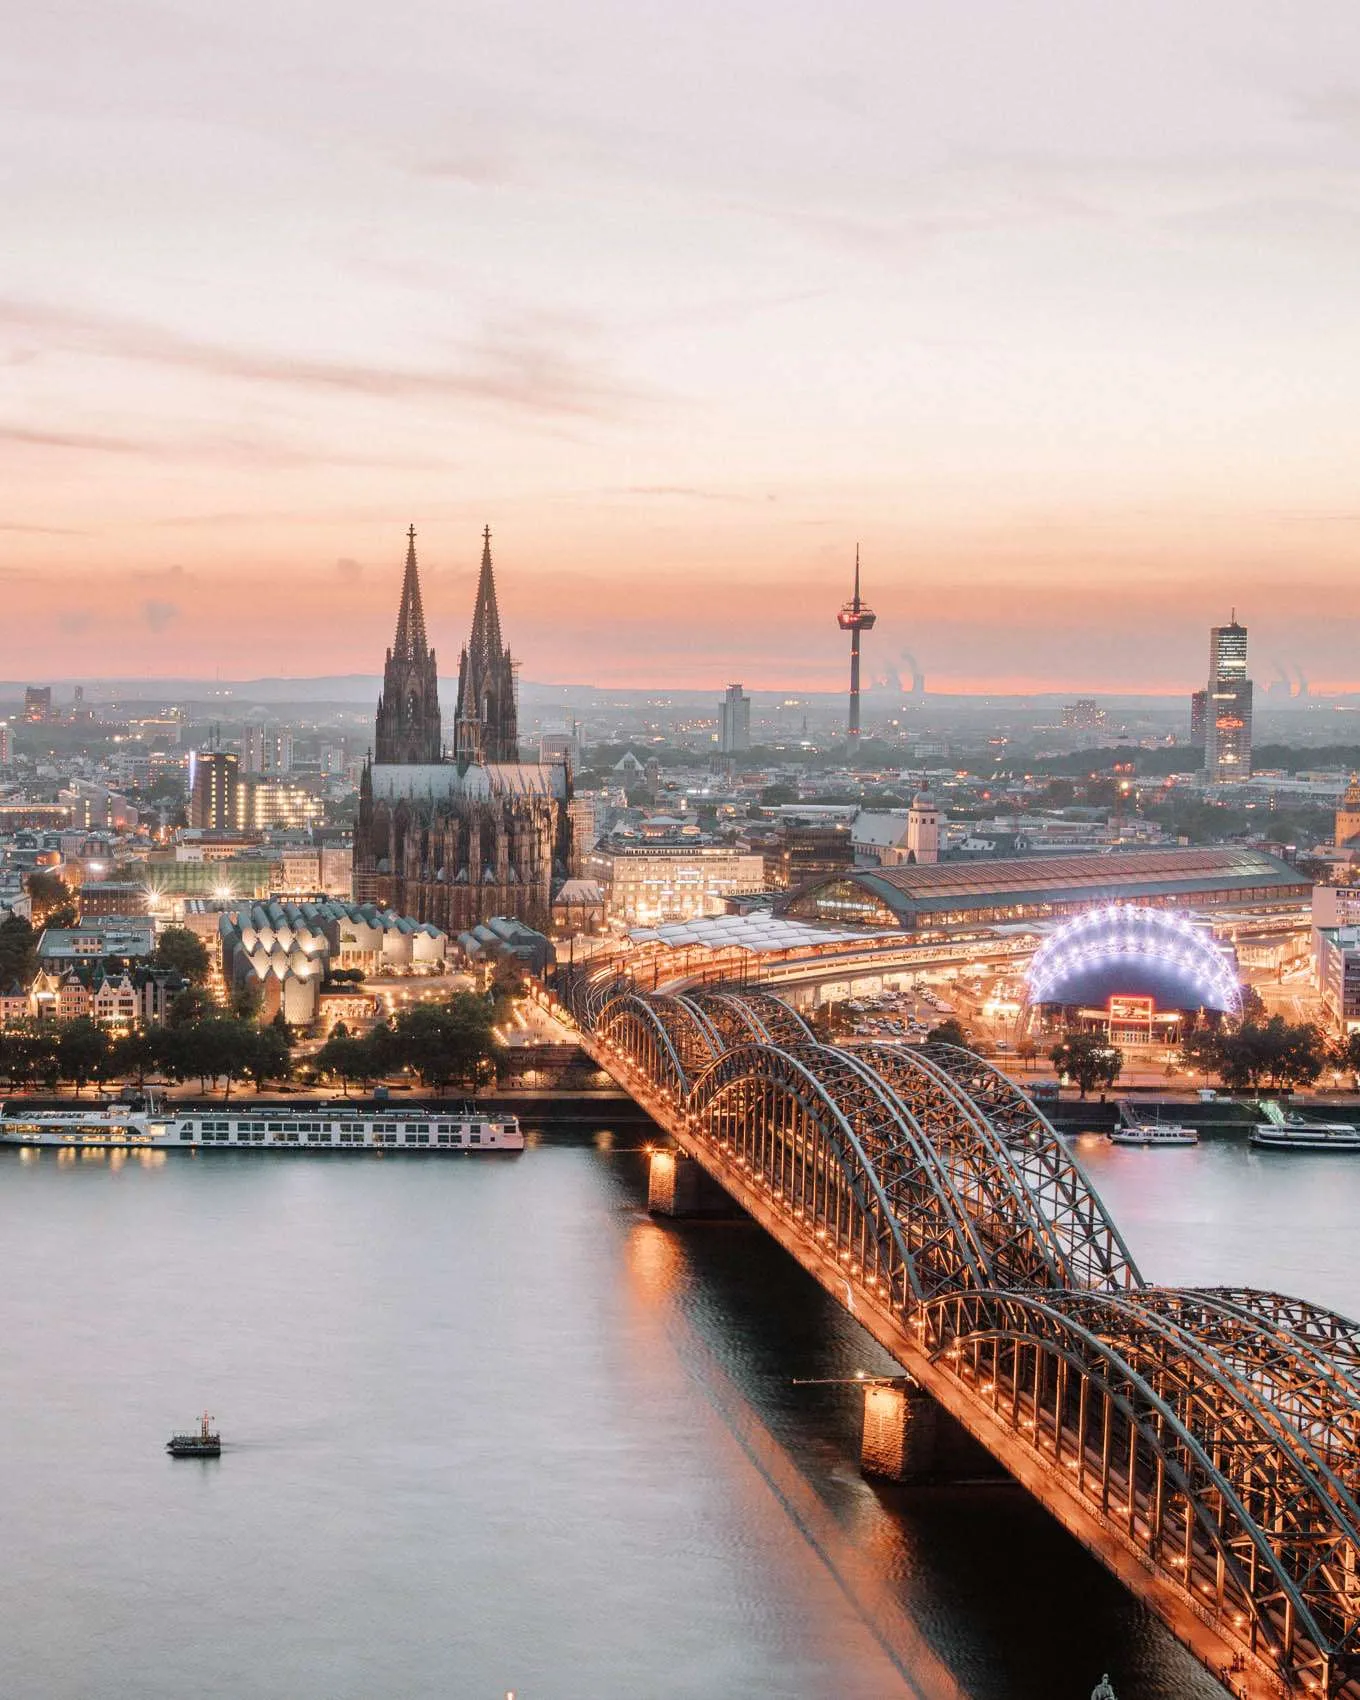 View of Cologne from the Koln Triangle Building.webp